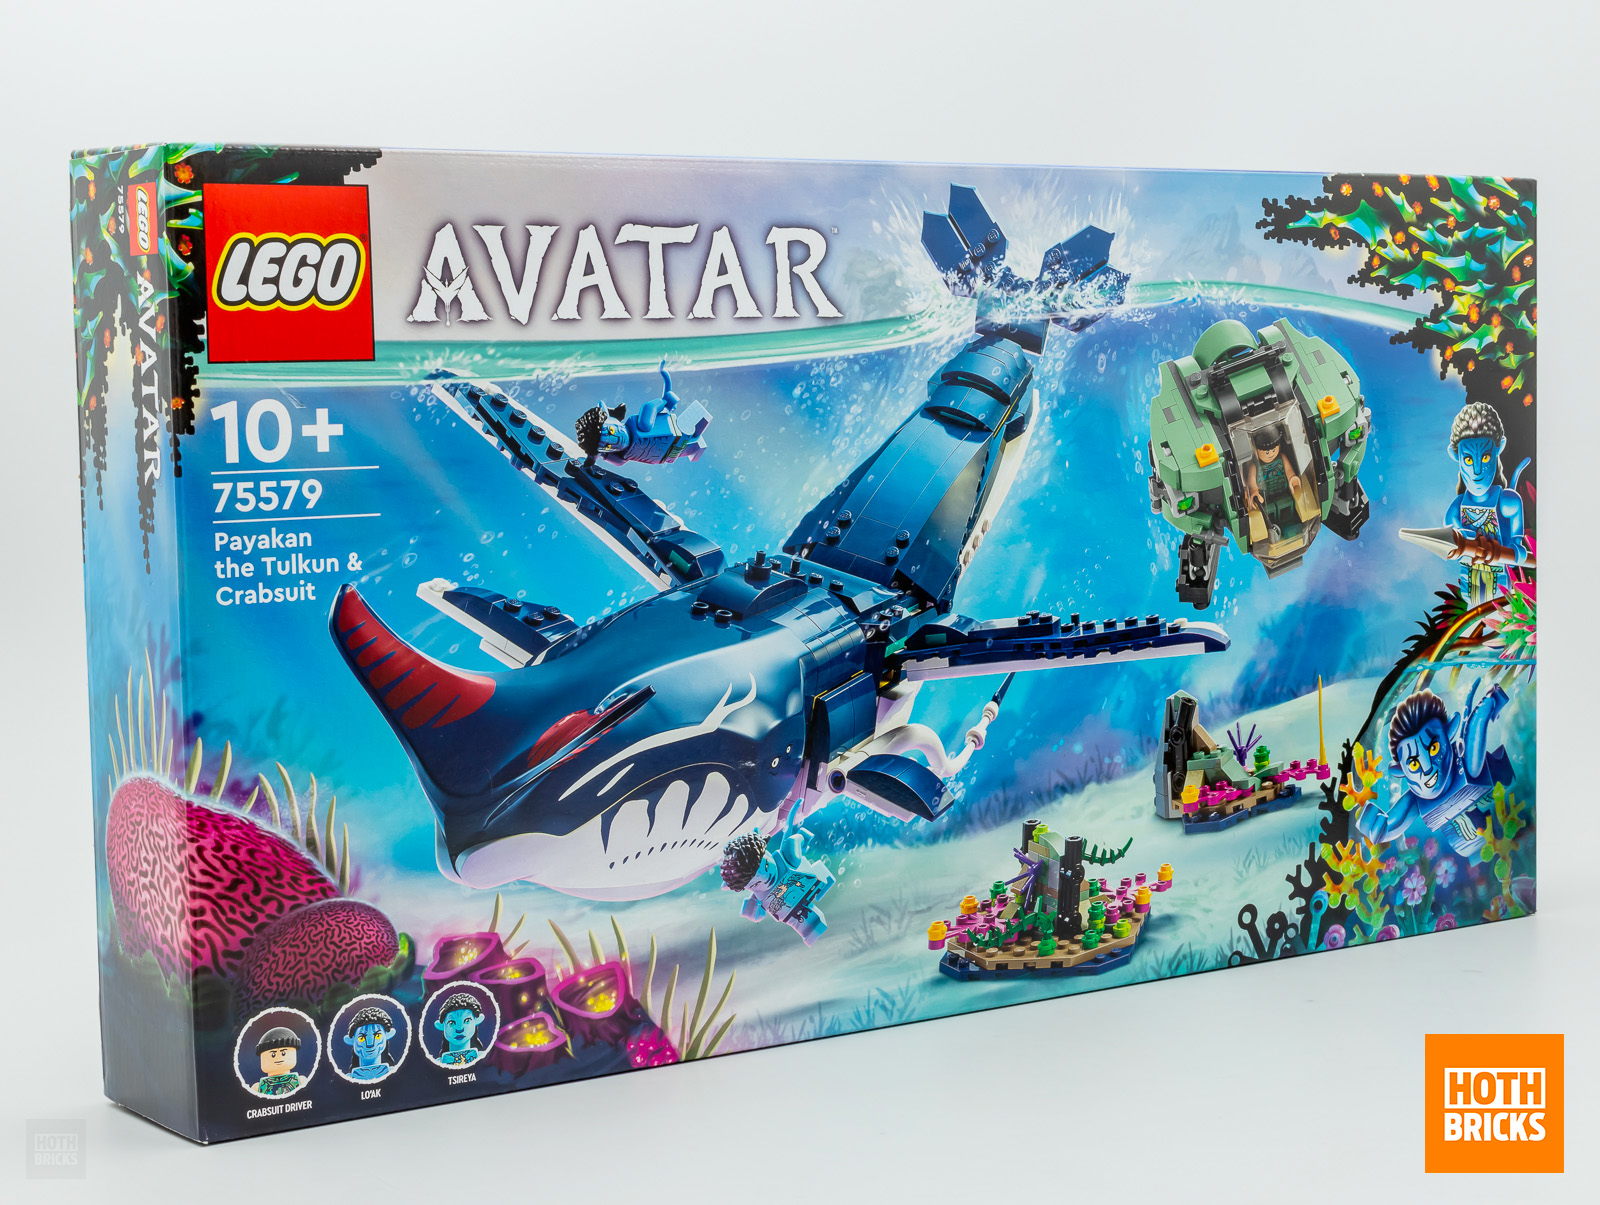 Contest: a copy of the LEGO Avatar 75579 Payakan The Tulkun & Crabsuit set to be won!